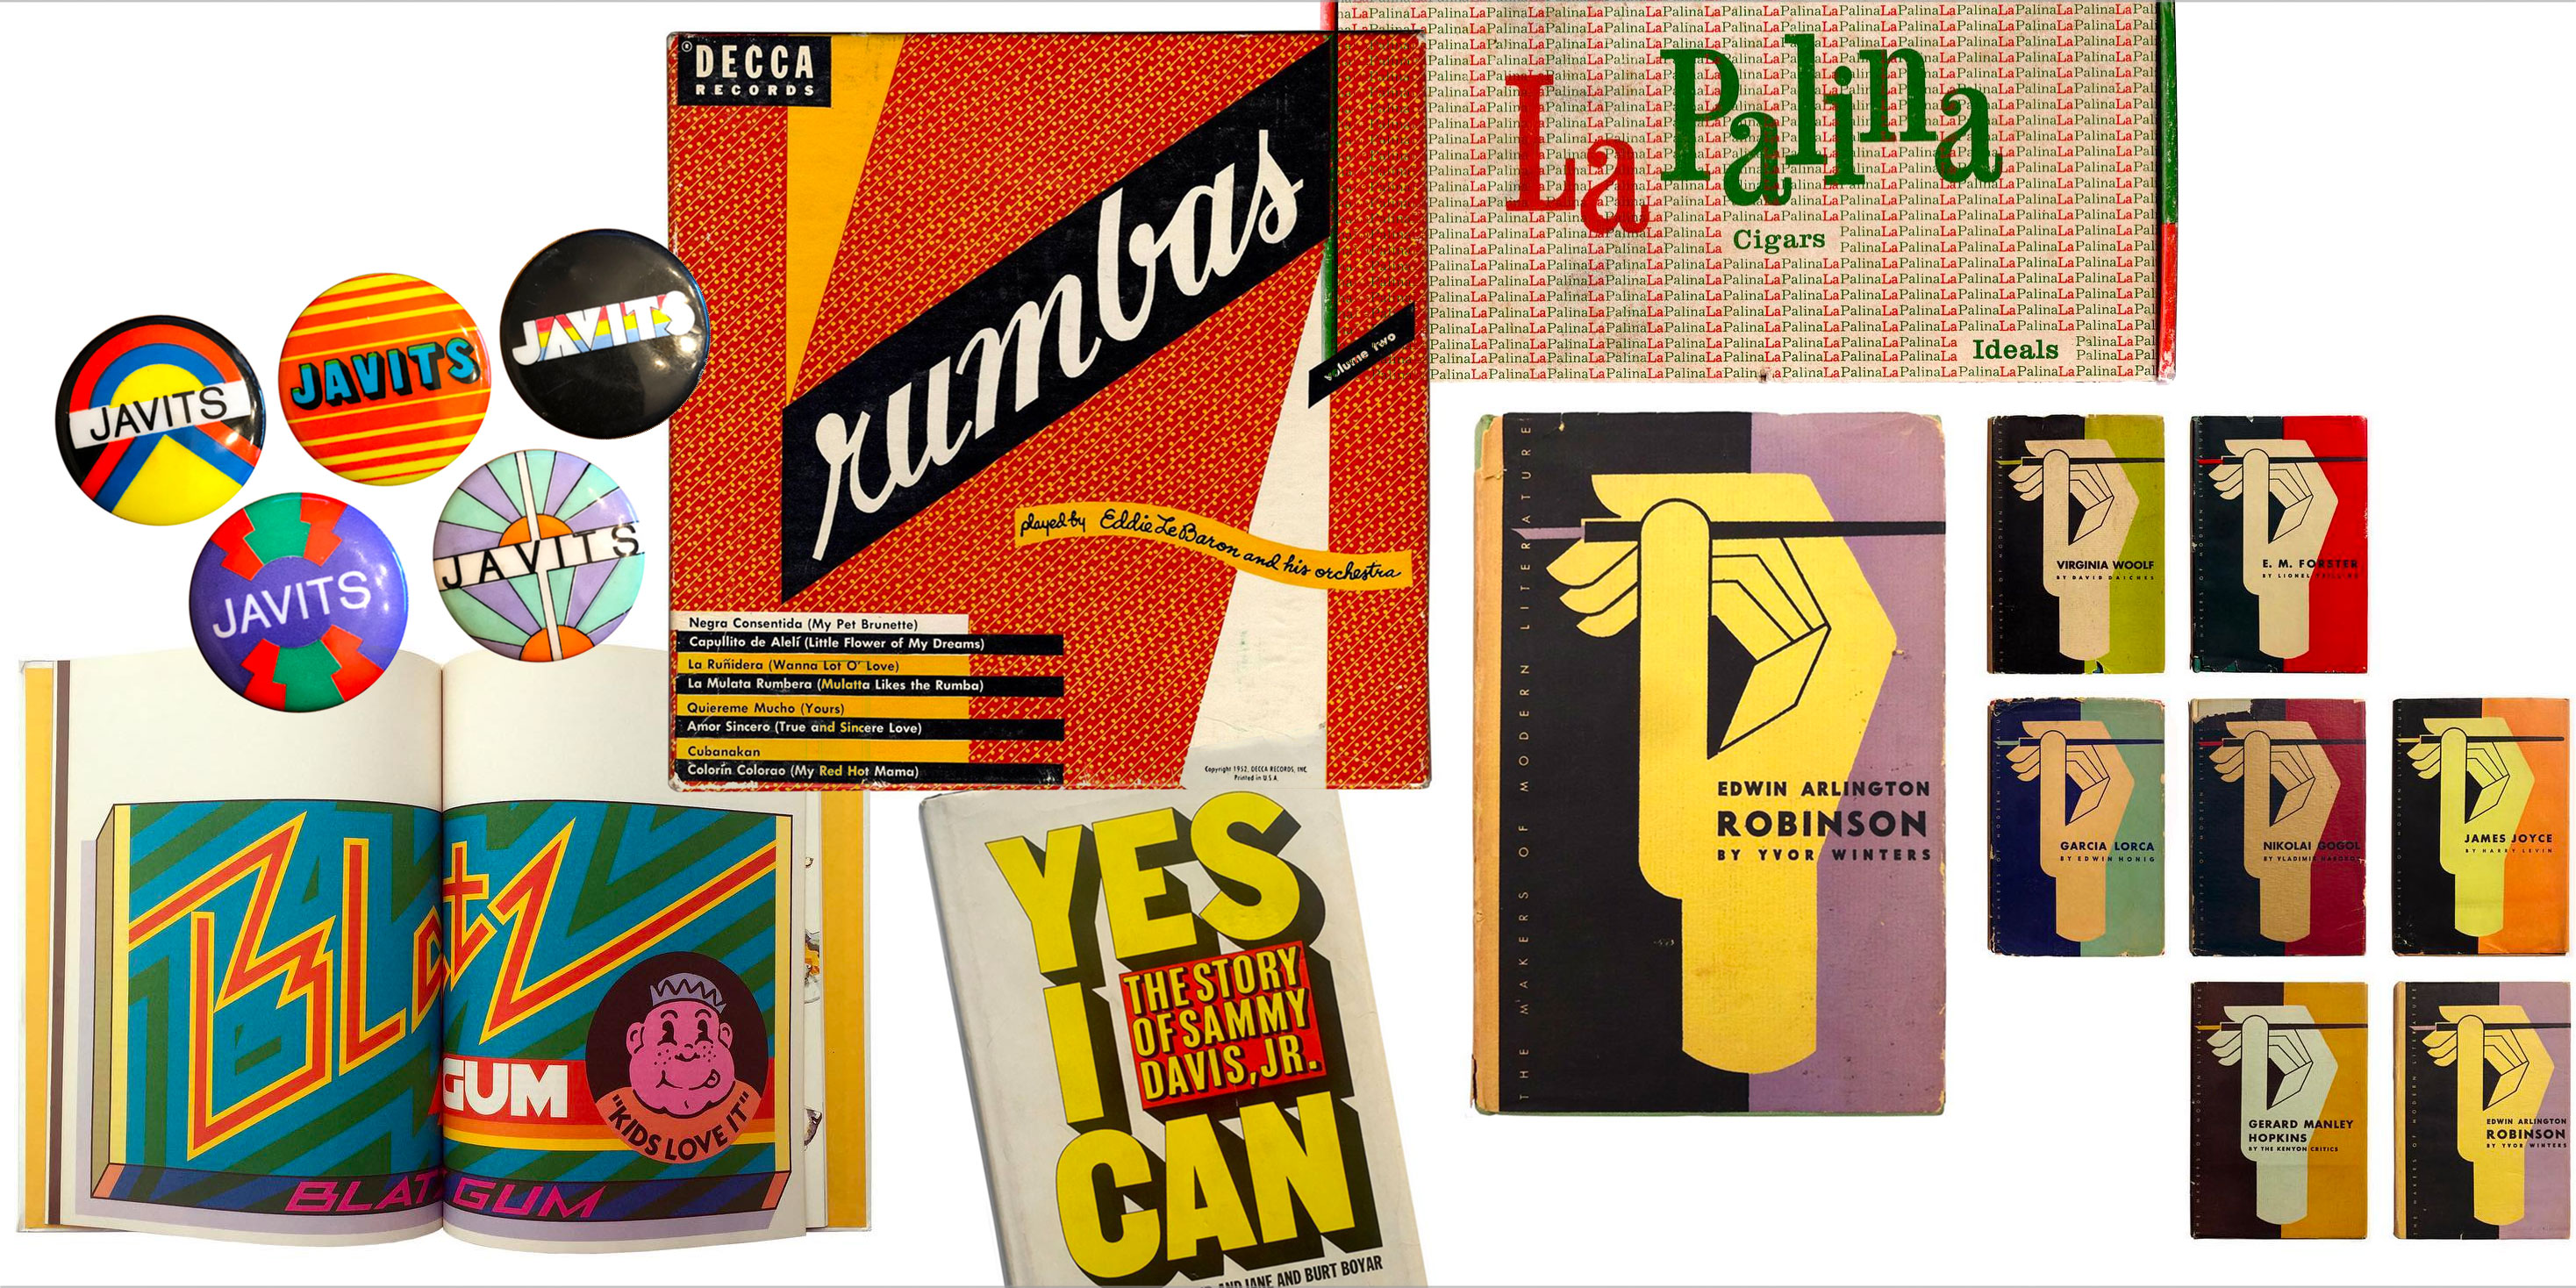 Objects collected by Scott Lindberg, including designs by Milton Glaser, Seymour Chwast, Ladislav Sutnar, Herb Lubalin, Paul Rand, and Alvin Lustig